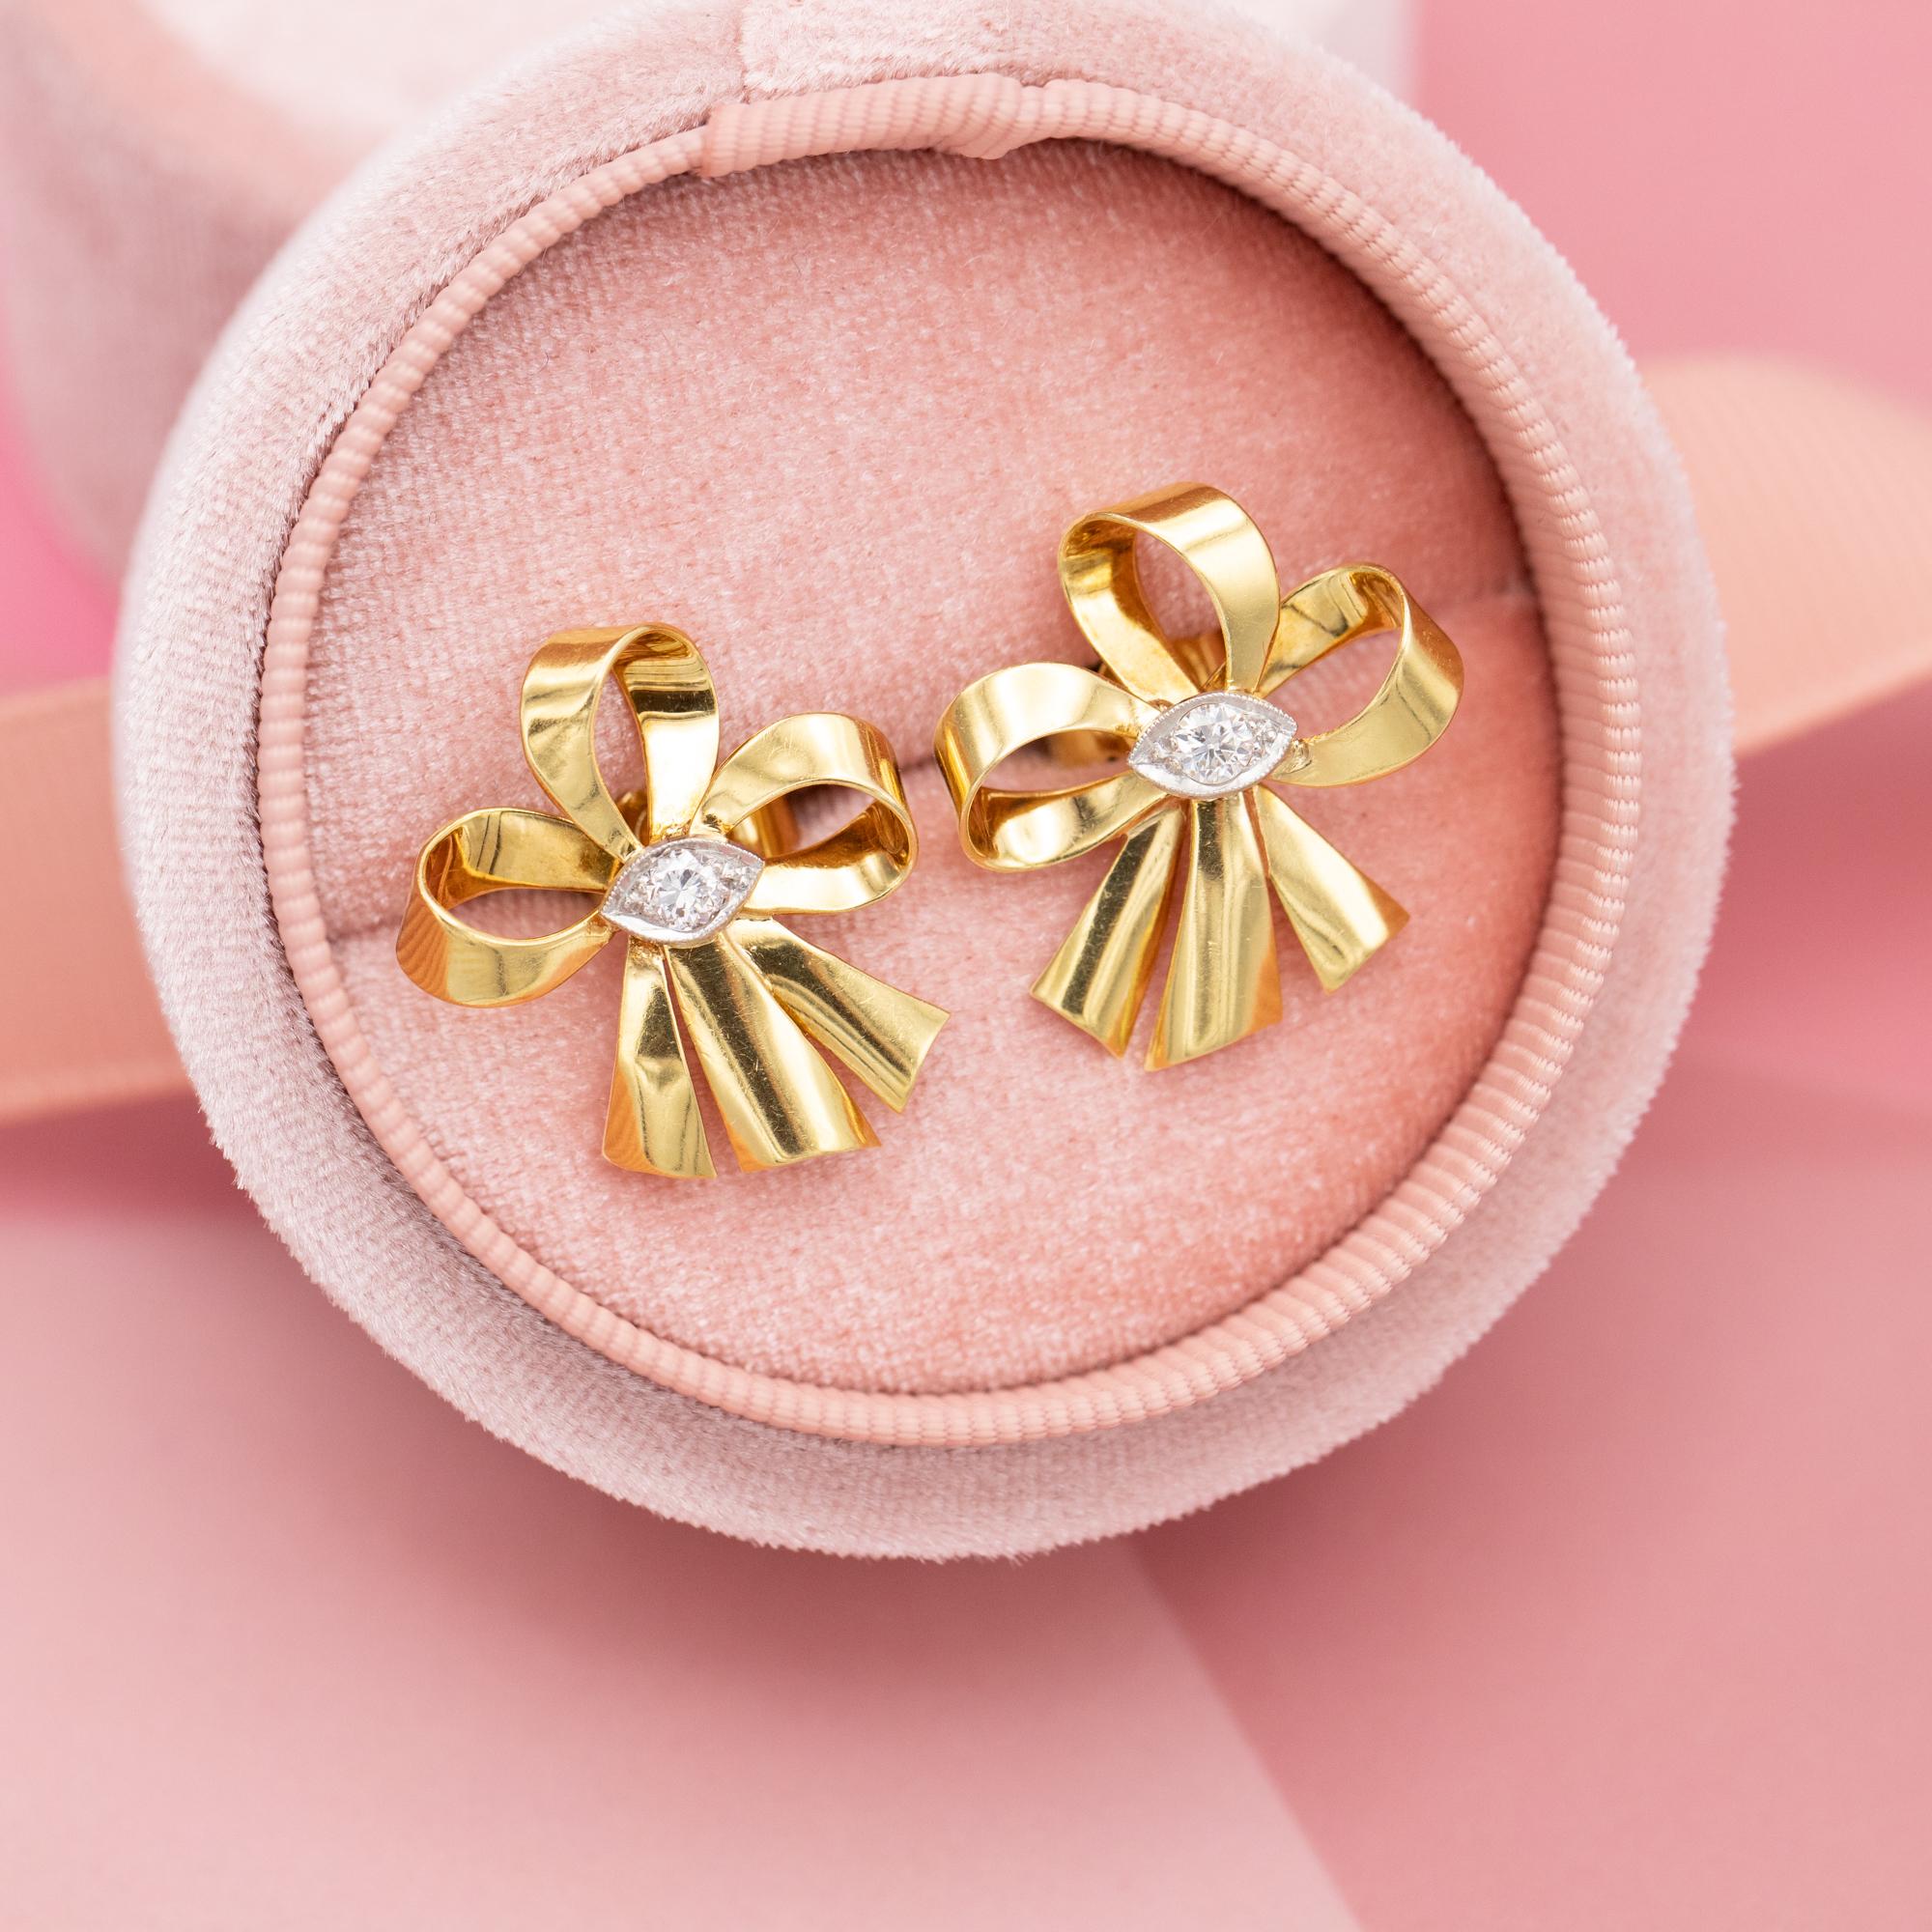 For sale is this 18 K yellow gold pair of diamond earrings. This beautiful pair is set with two brilliant cut diamonds which combine for approximately 0,2ct. They are set in a marquise shaped white setting inside an elegant bow shape. They date back